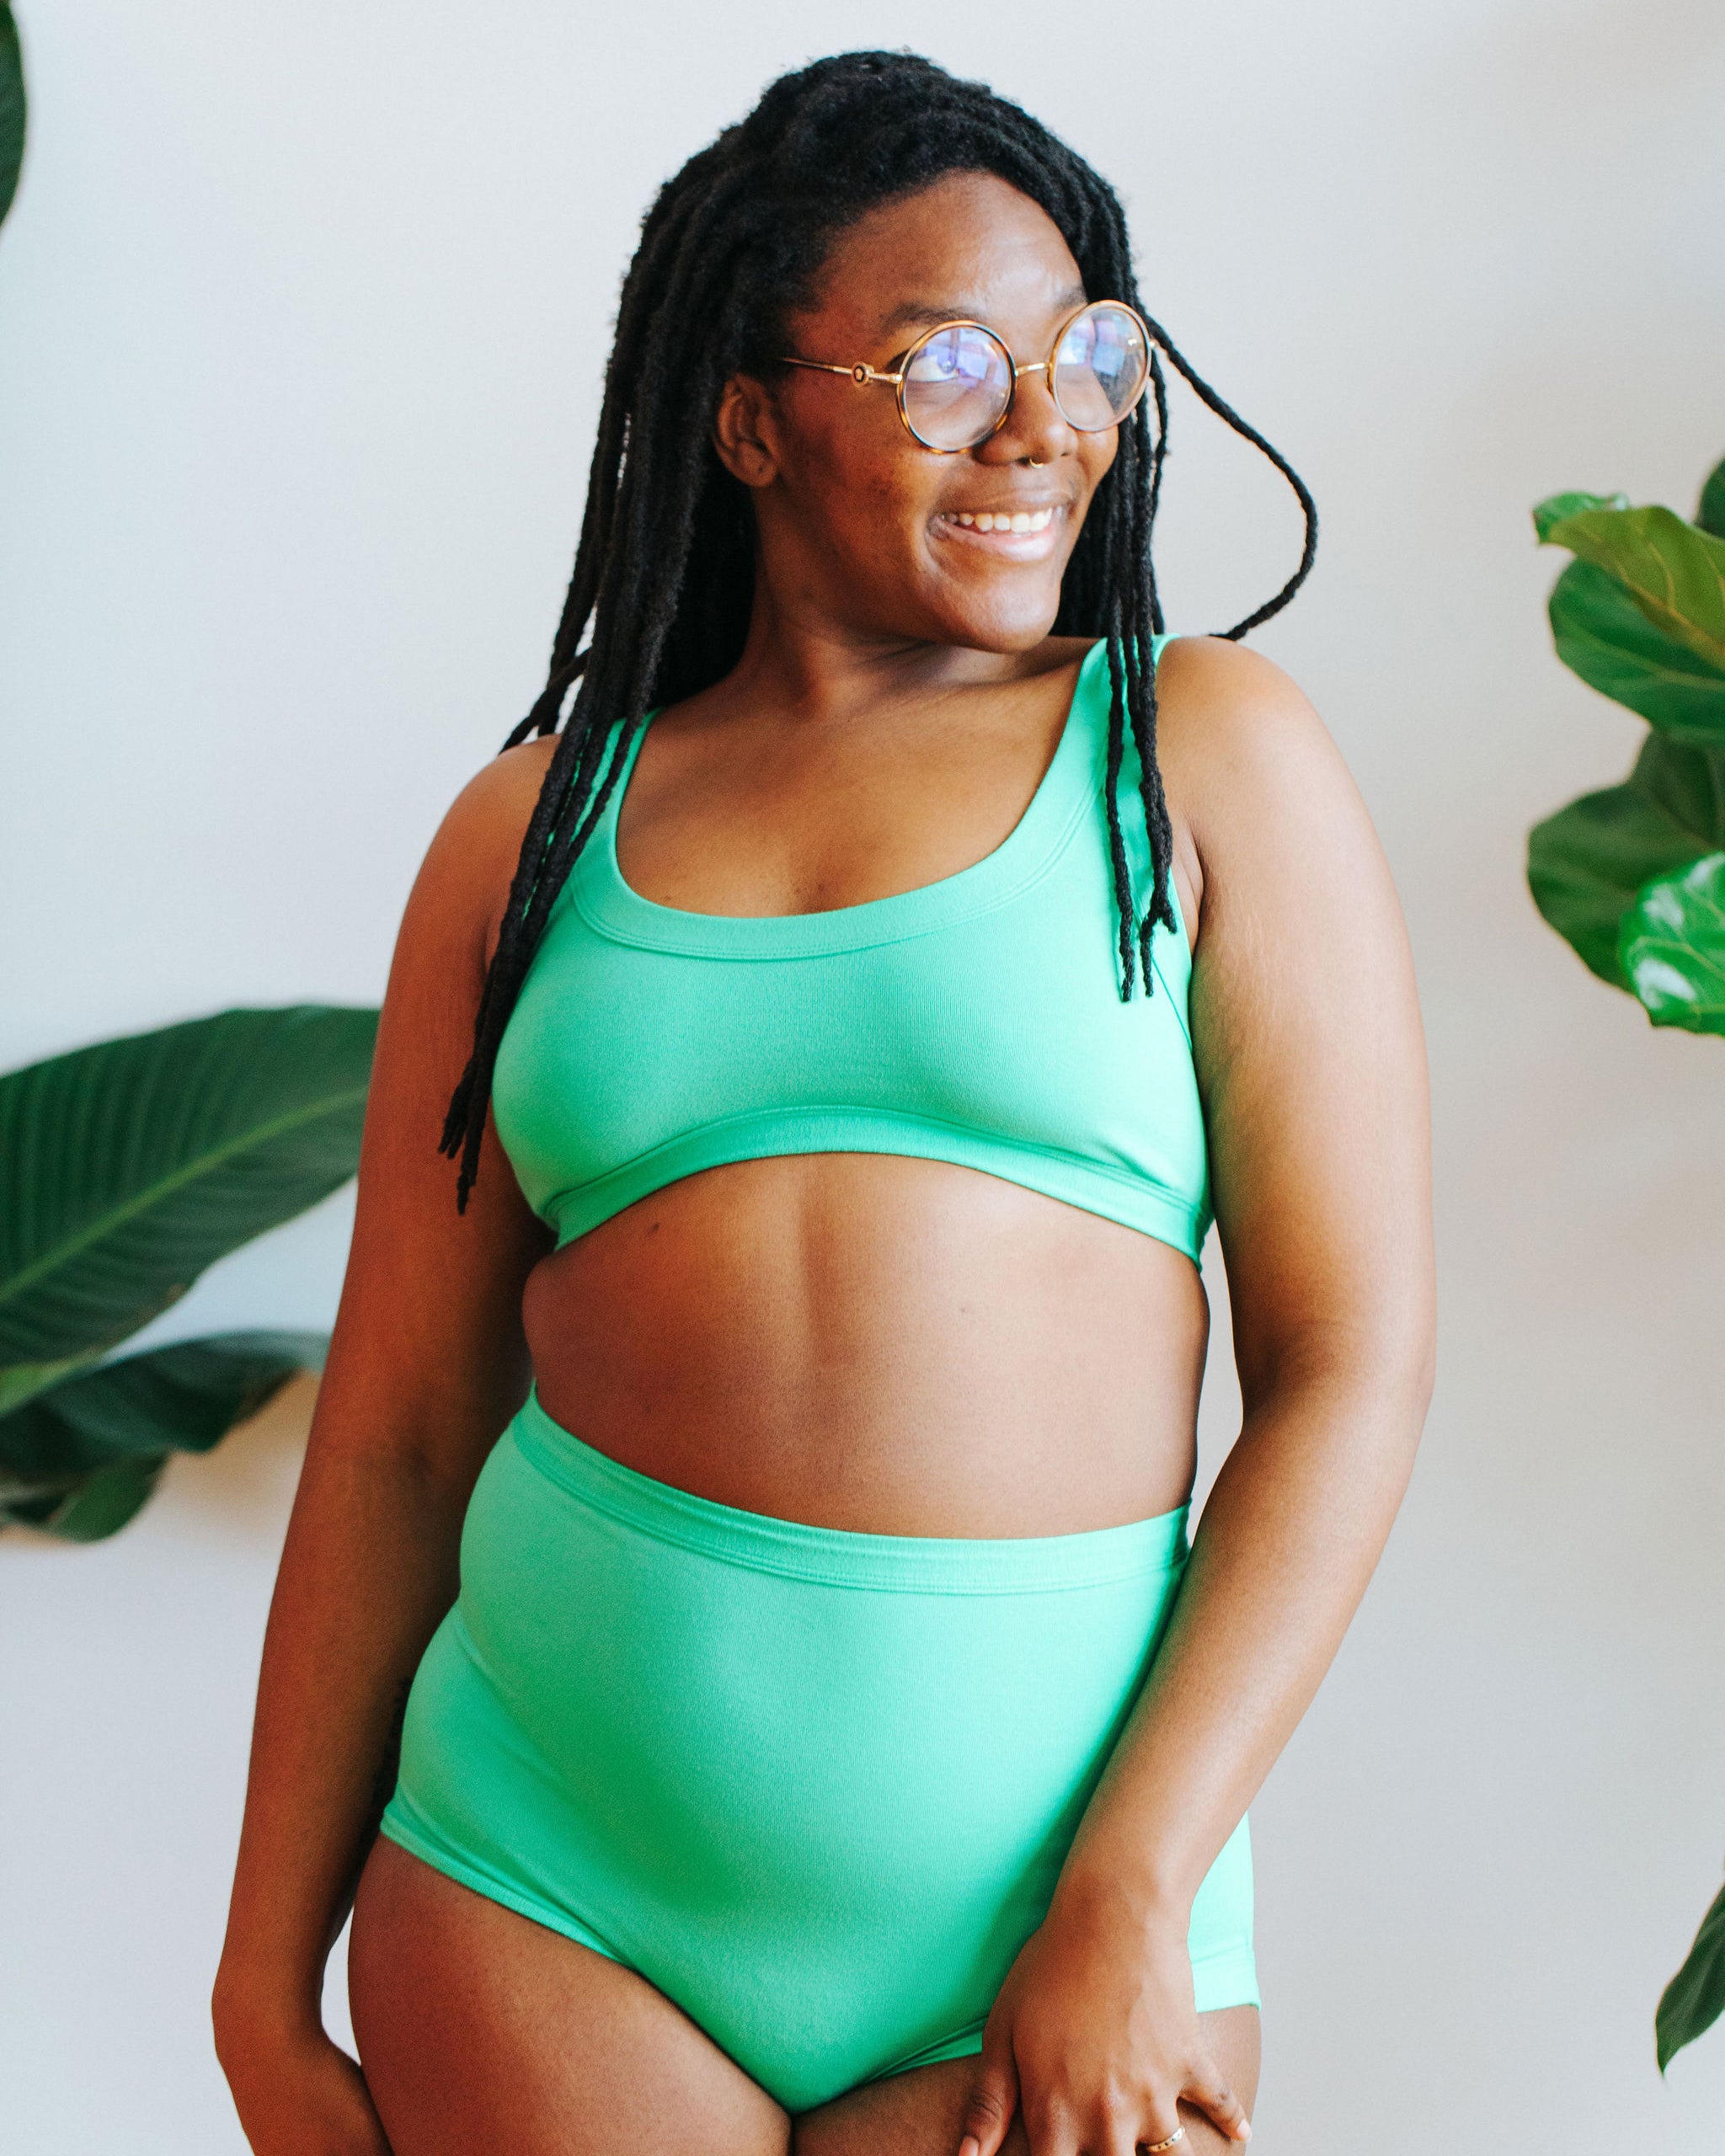 Close up of model in front of plants wearing a Bralette and Sky Rise style underwear in the light green color Sour Apple.